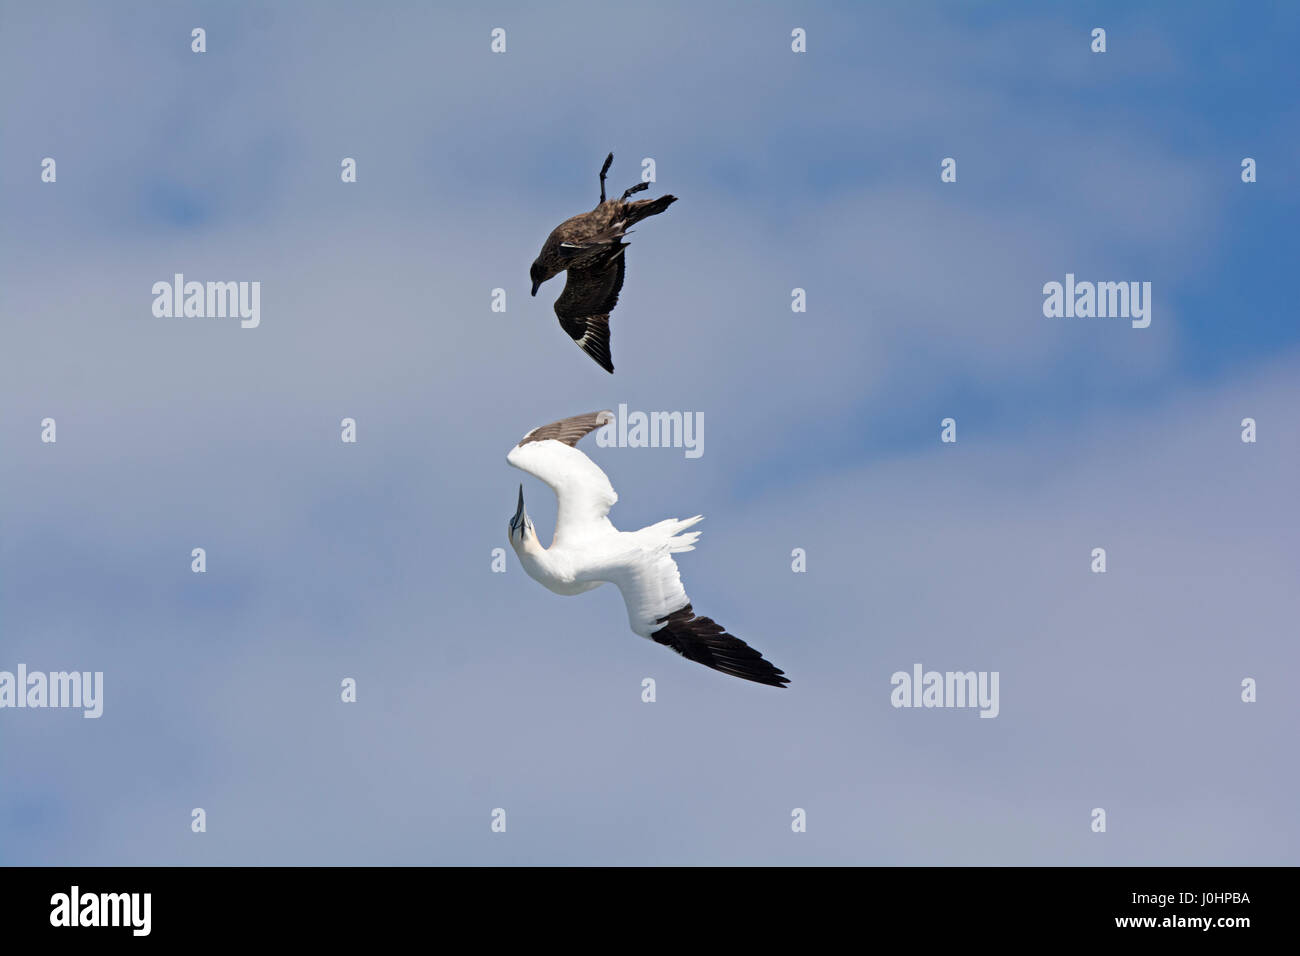 Great Skua Stercorarius skua attacking Gannet on route ack to its colony, to make it disgorge fish, behaviour known as Kleptoparasitism (parasitism by Stock Photo